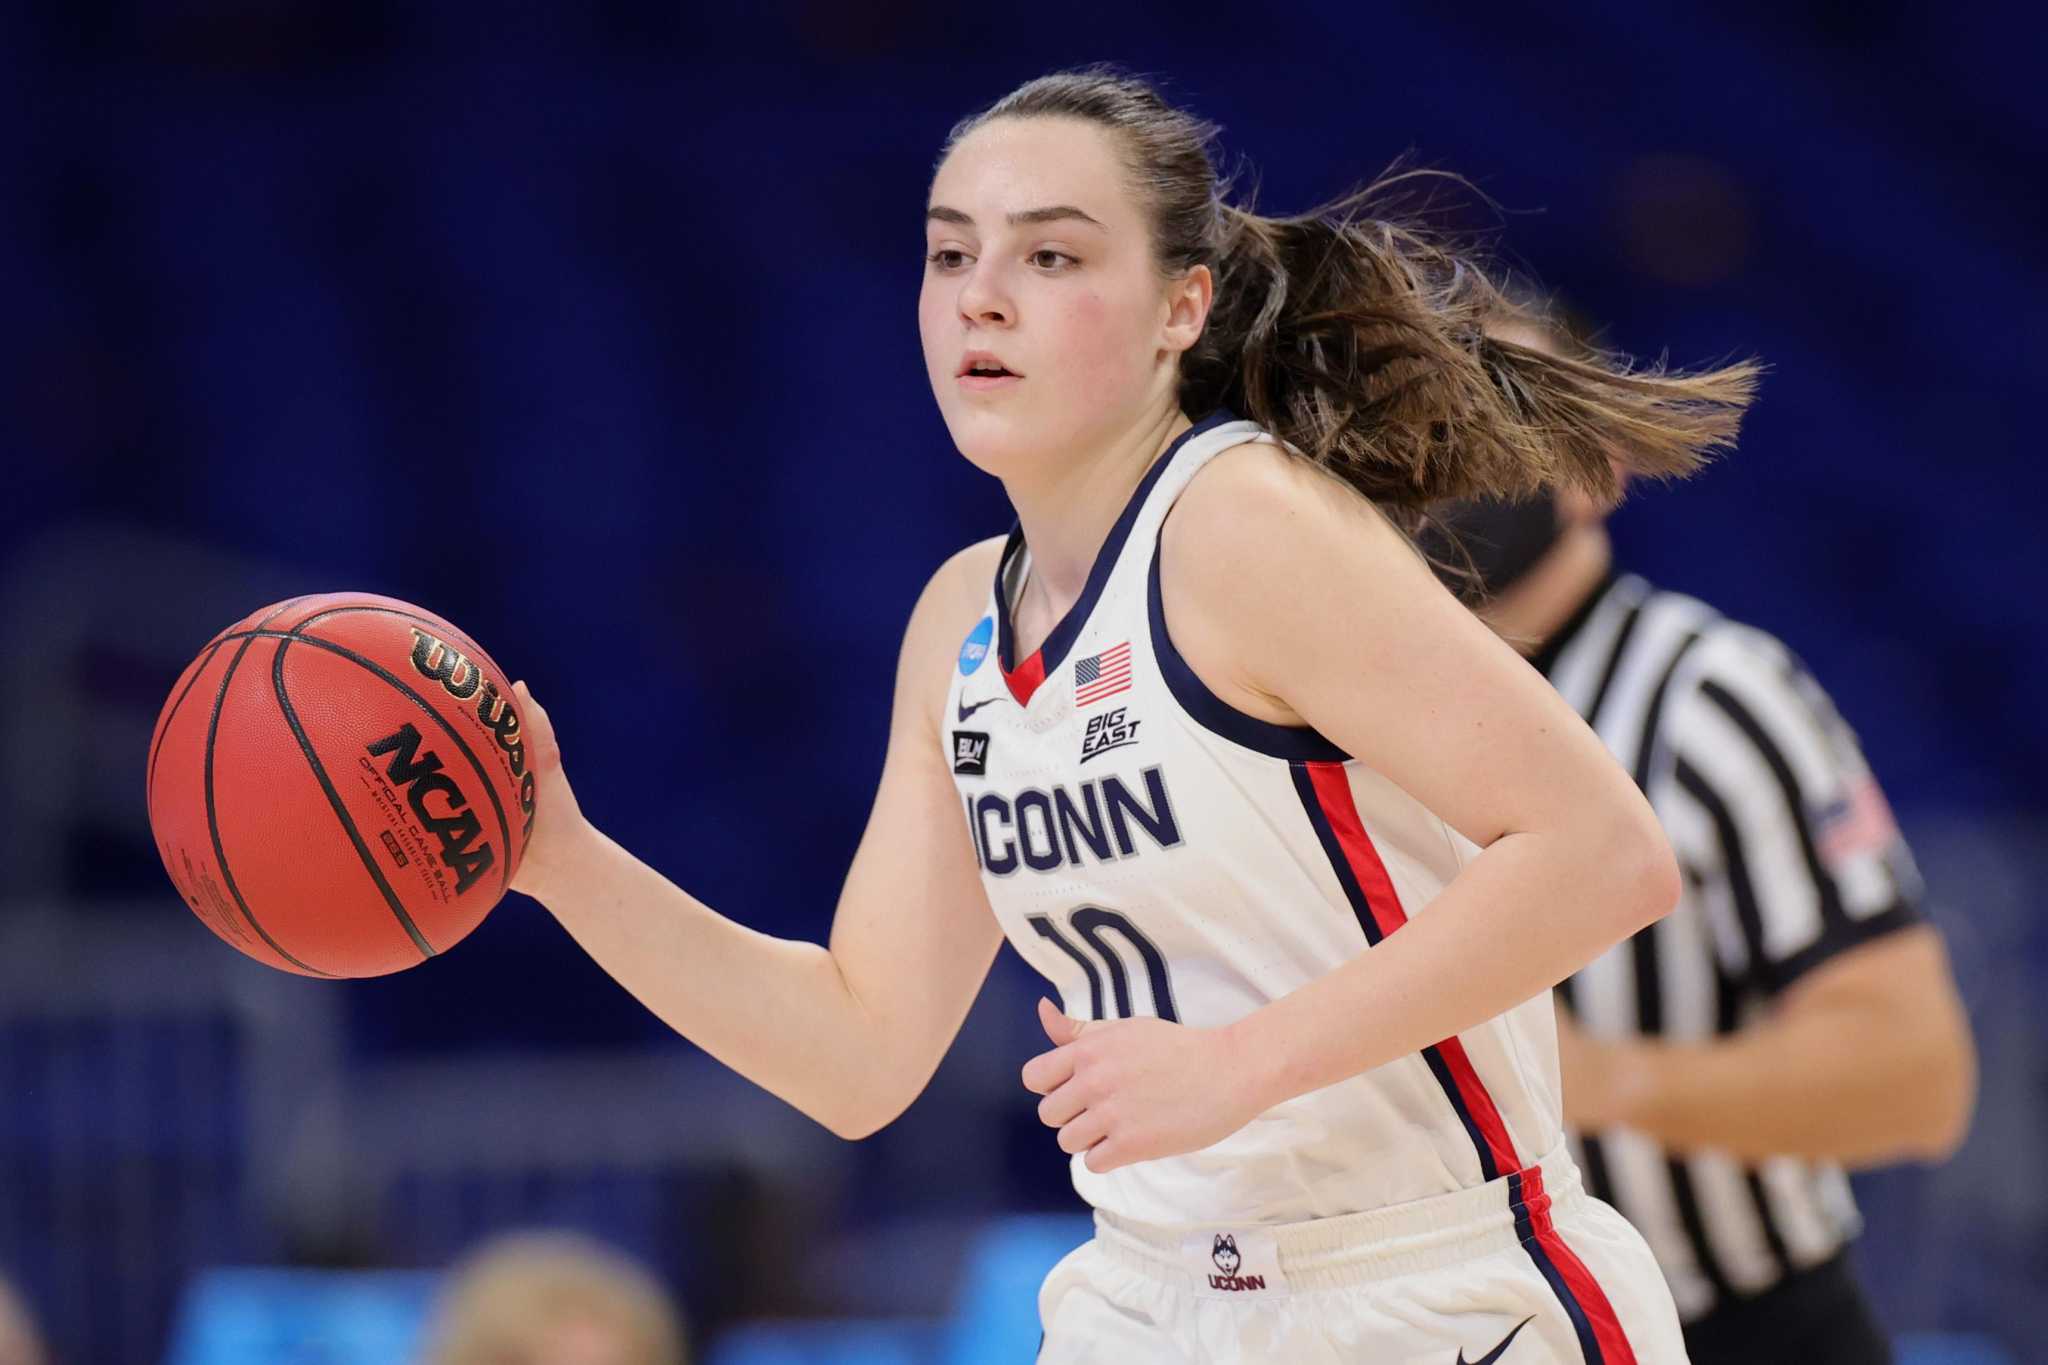 UConn freshman guard Nika Muhl out for NCAA secondround game against